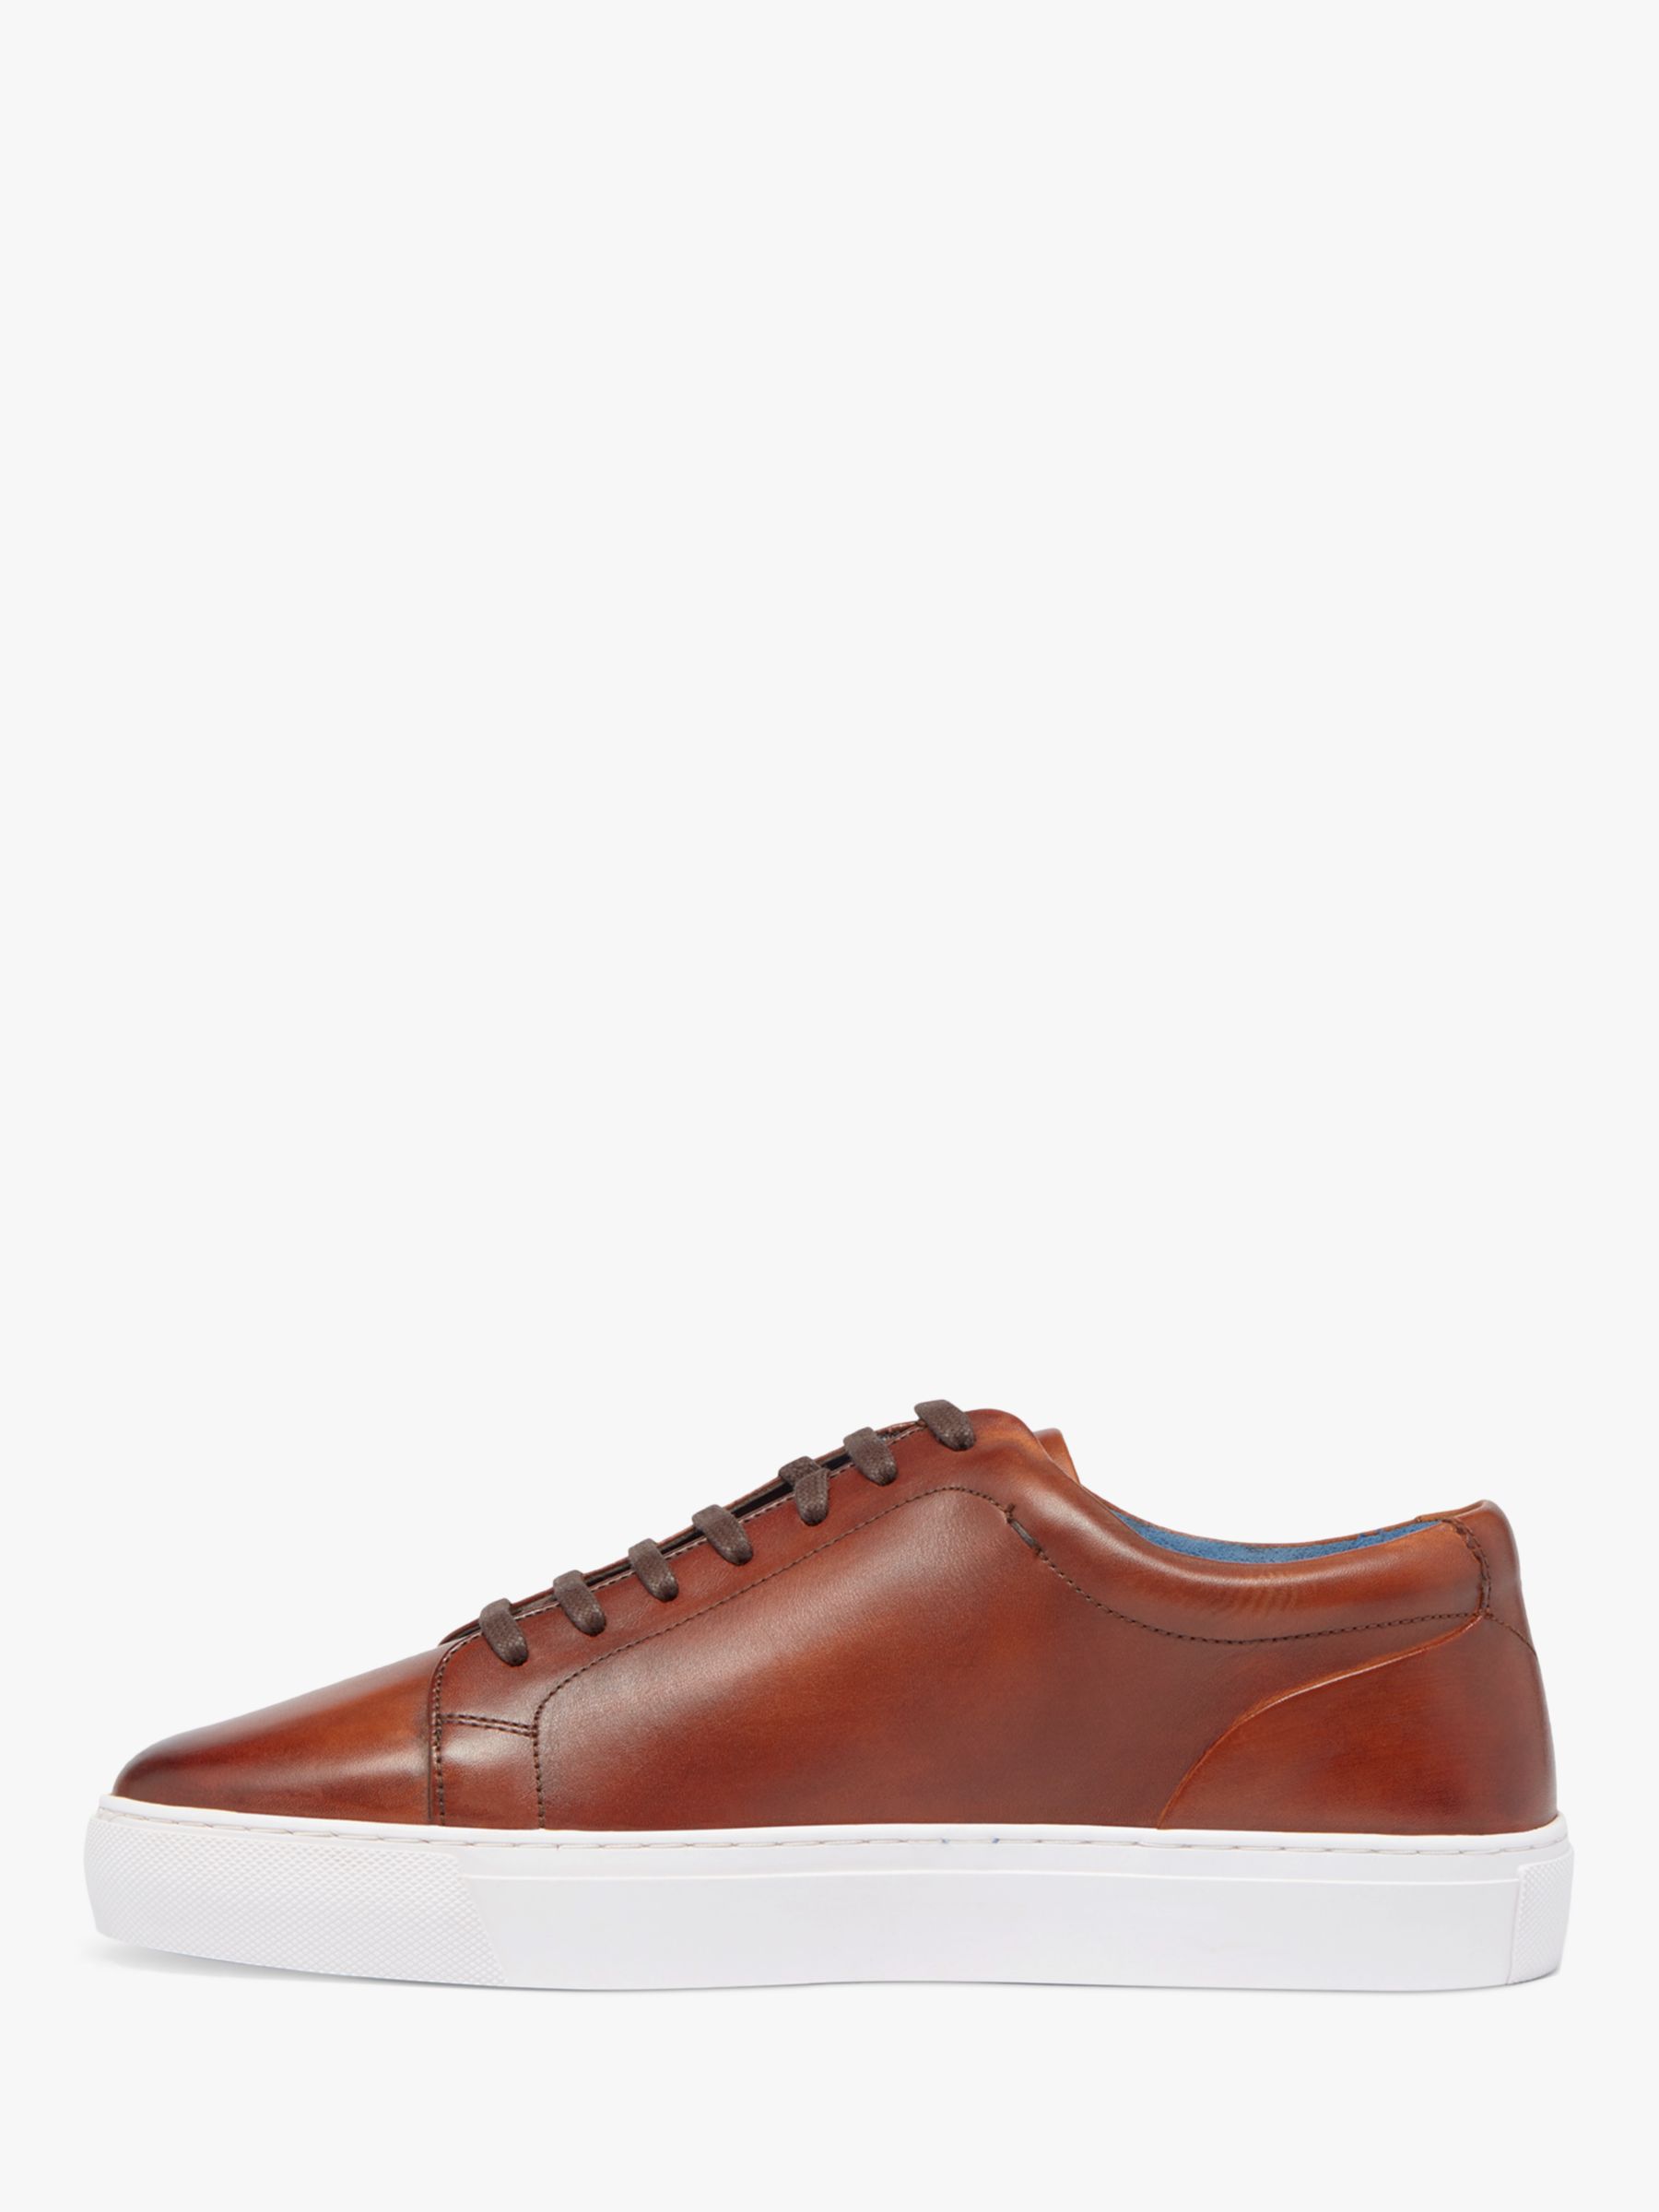 Oliver Sweeney Hayle Leather Trainers, Cognac at John Lewis & Partners